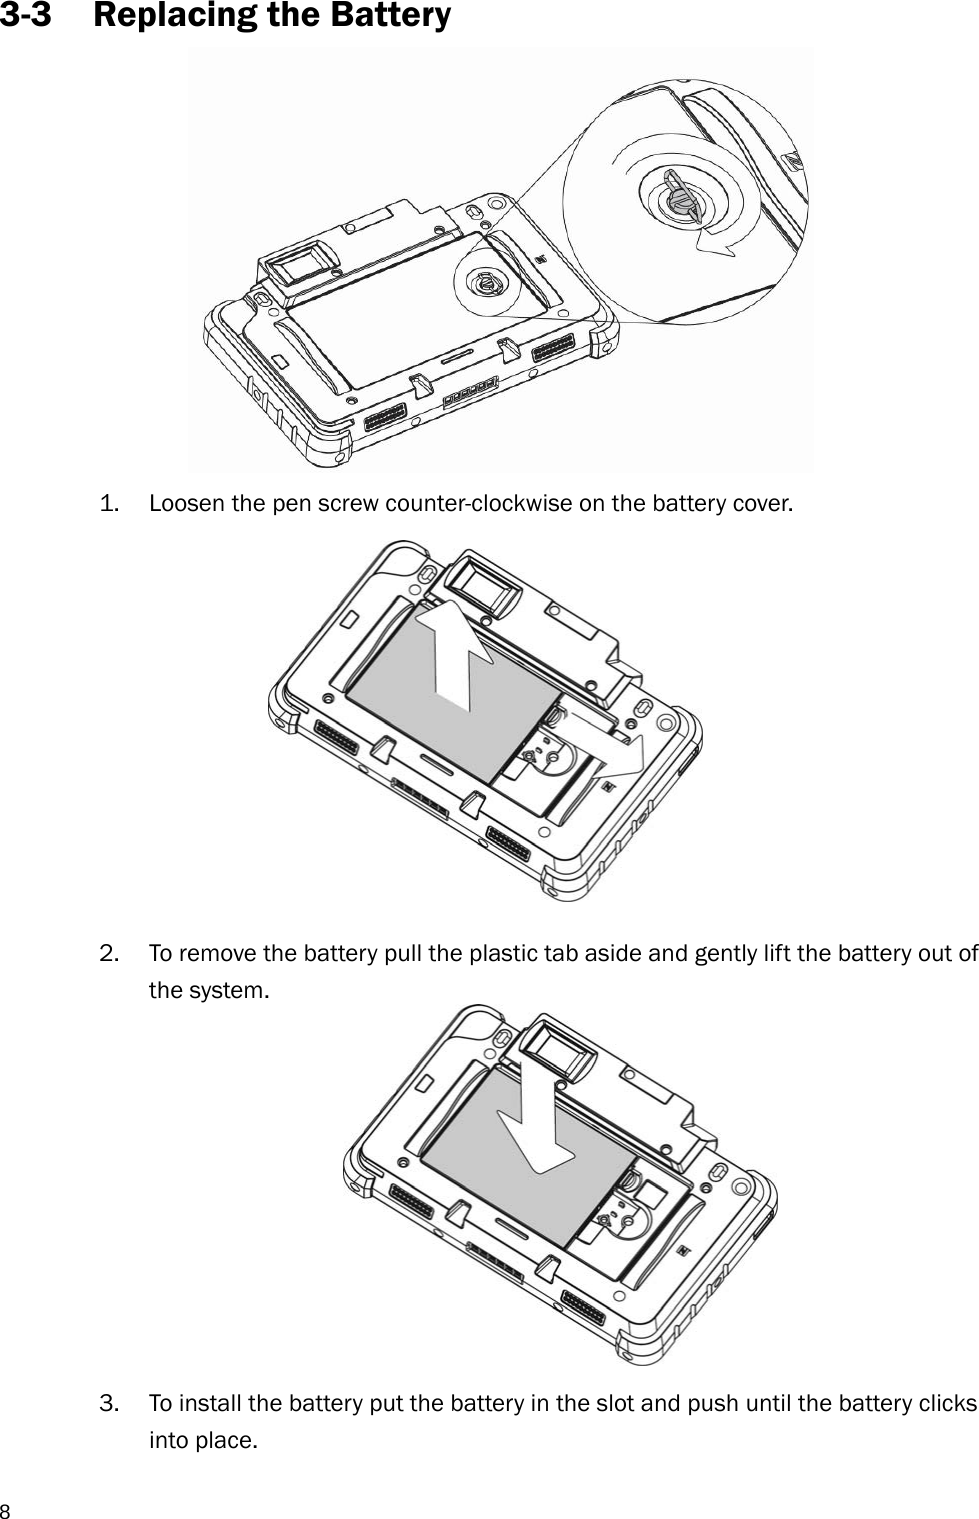  83-3 Replacing the Battery  1. Loosen the pen screw counter-clockwise on the battery cover.            2. To remove the battery pull the plastic tab aside and gently lift the battery out of the system.           3. To install the battery put the battery in the slot and push until the battery clicks into place. 